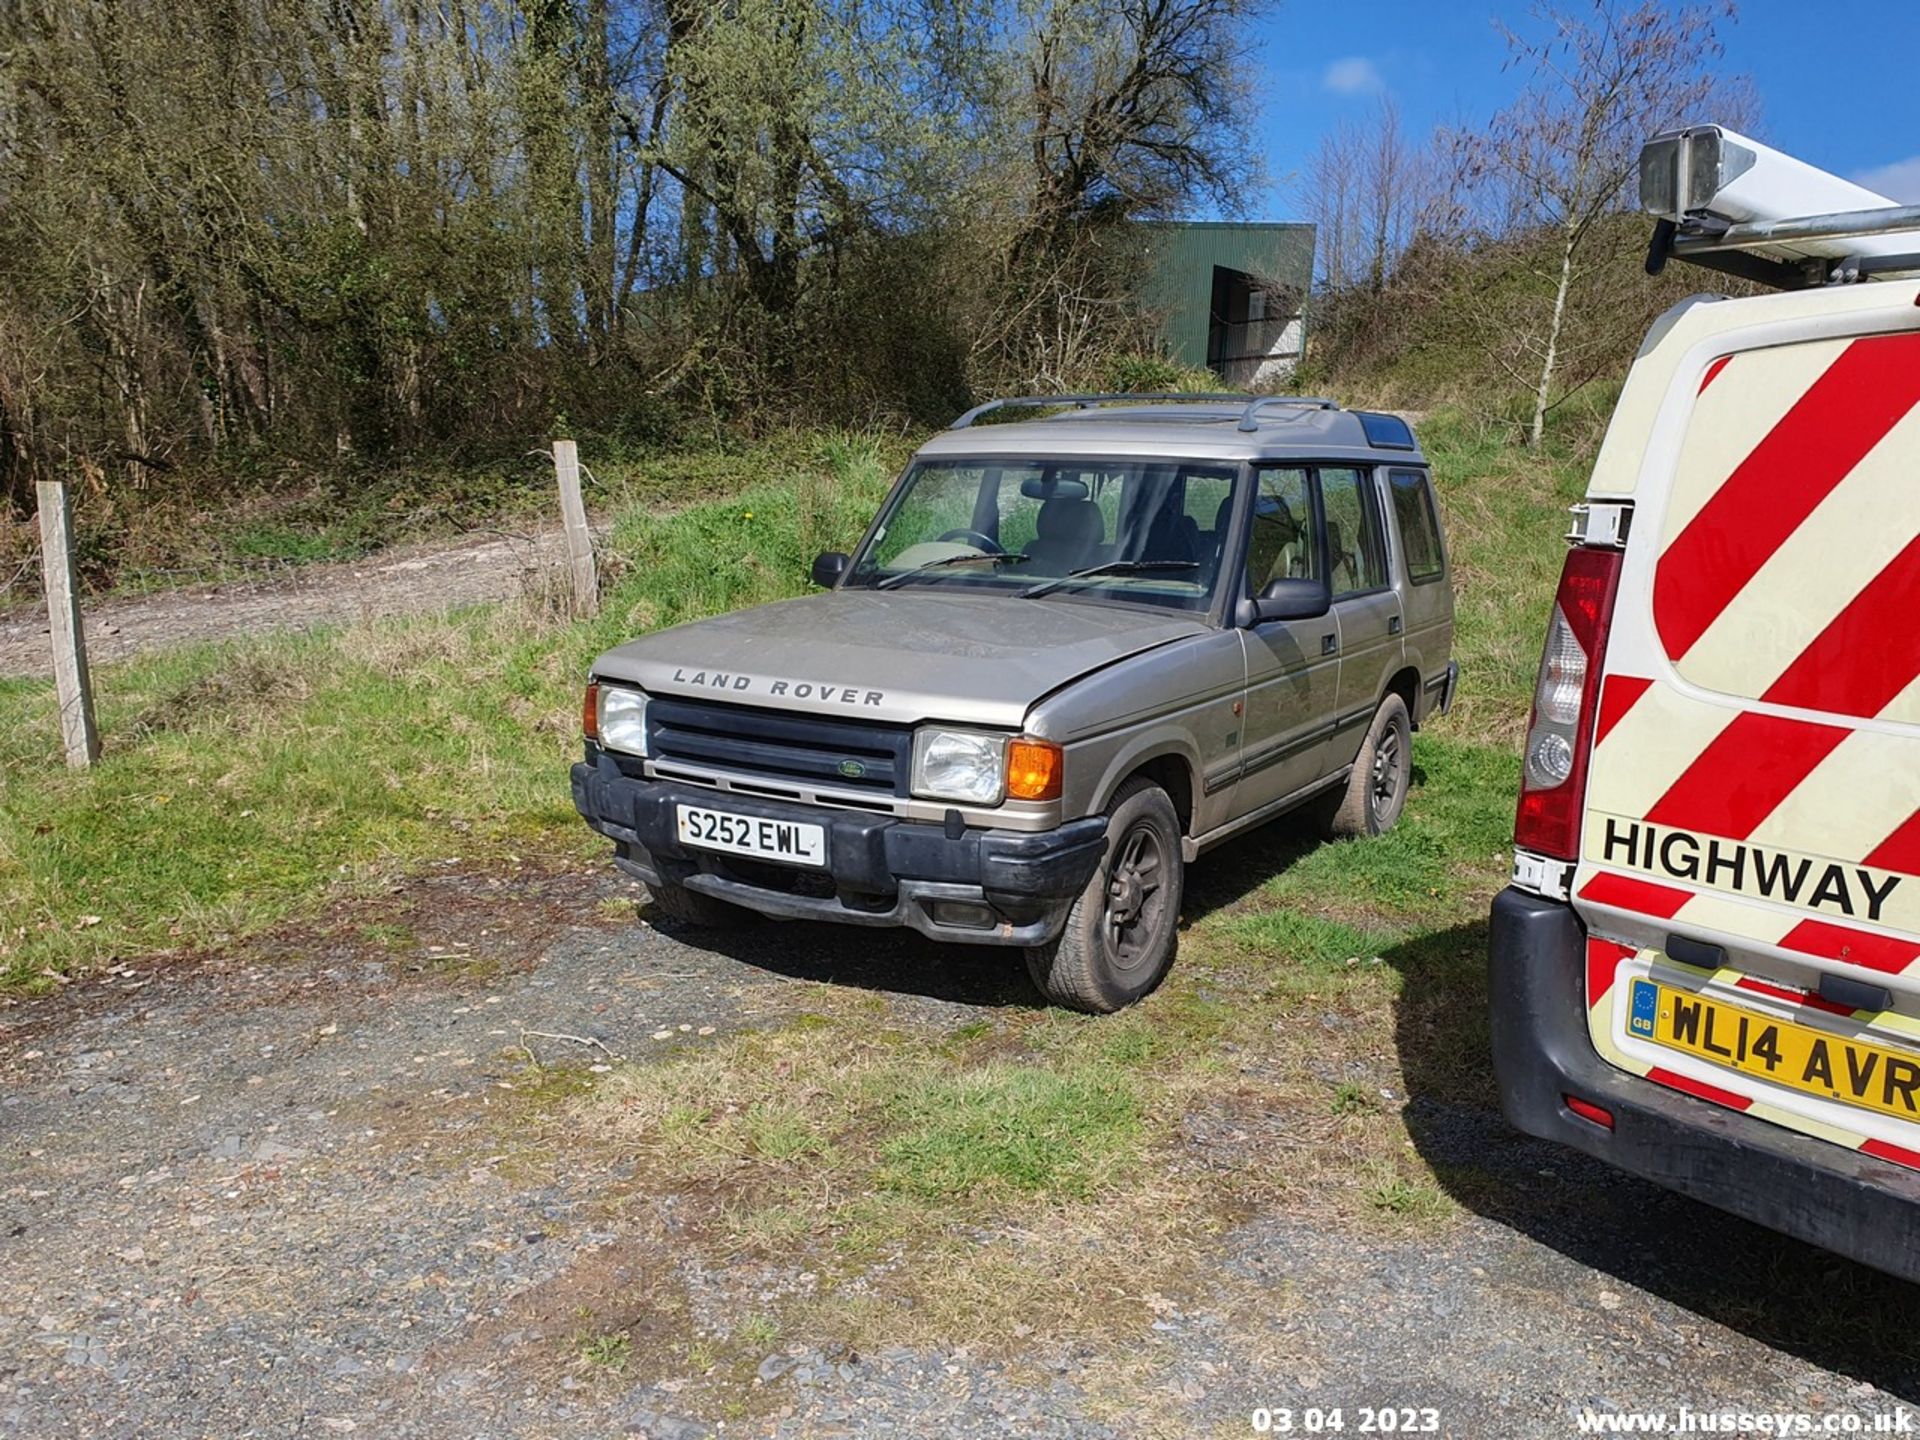 1998 LAND ROVER DISCOVERY ES TDI - 2495cc 5dr Estate (Gold) - Image 2 of 31